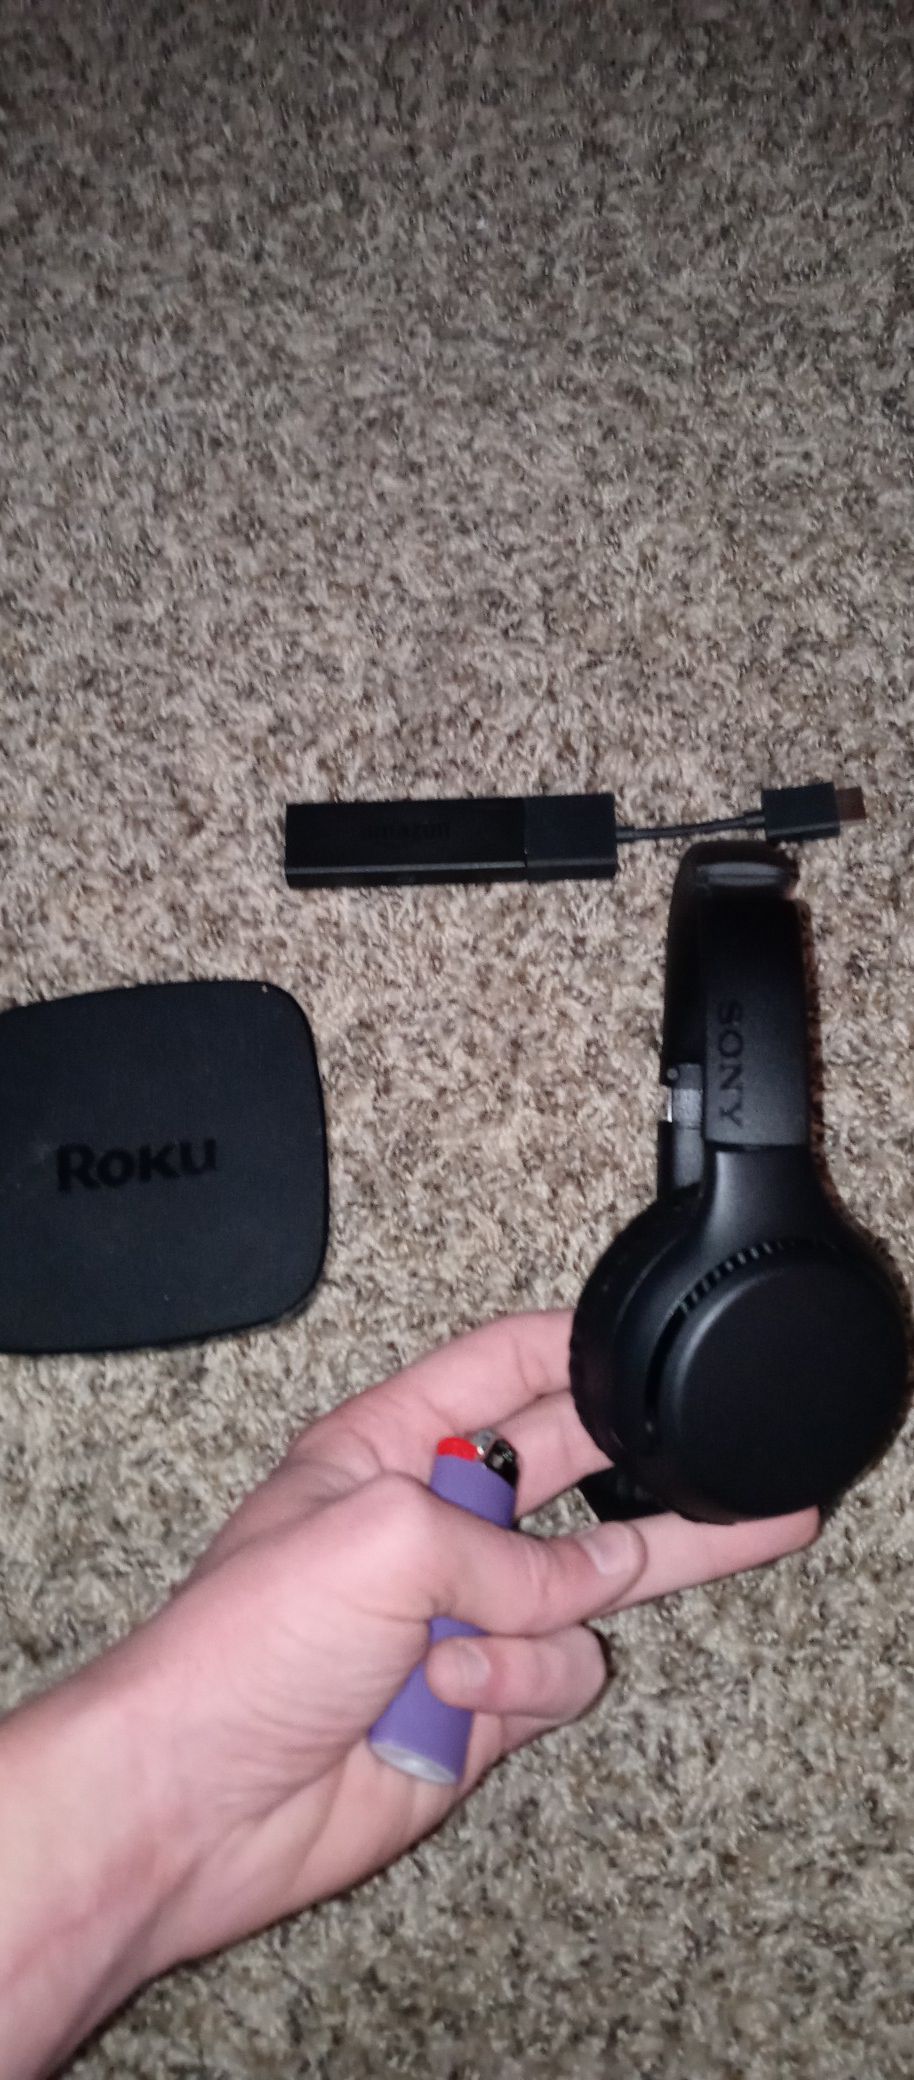 Roku fully operational with everything that came with it ($80), a fully unlocked fire stick ($100), and Sony noise canceling headphones ($250)